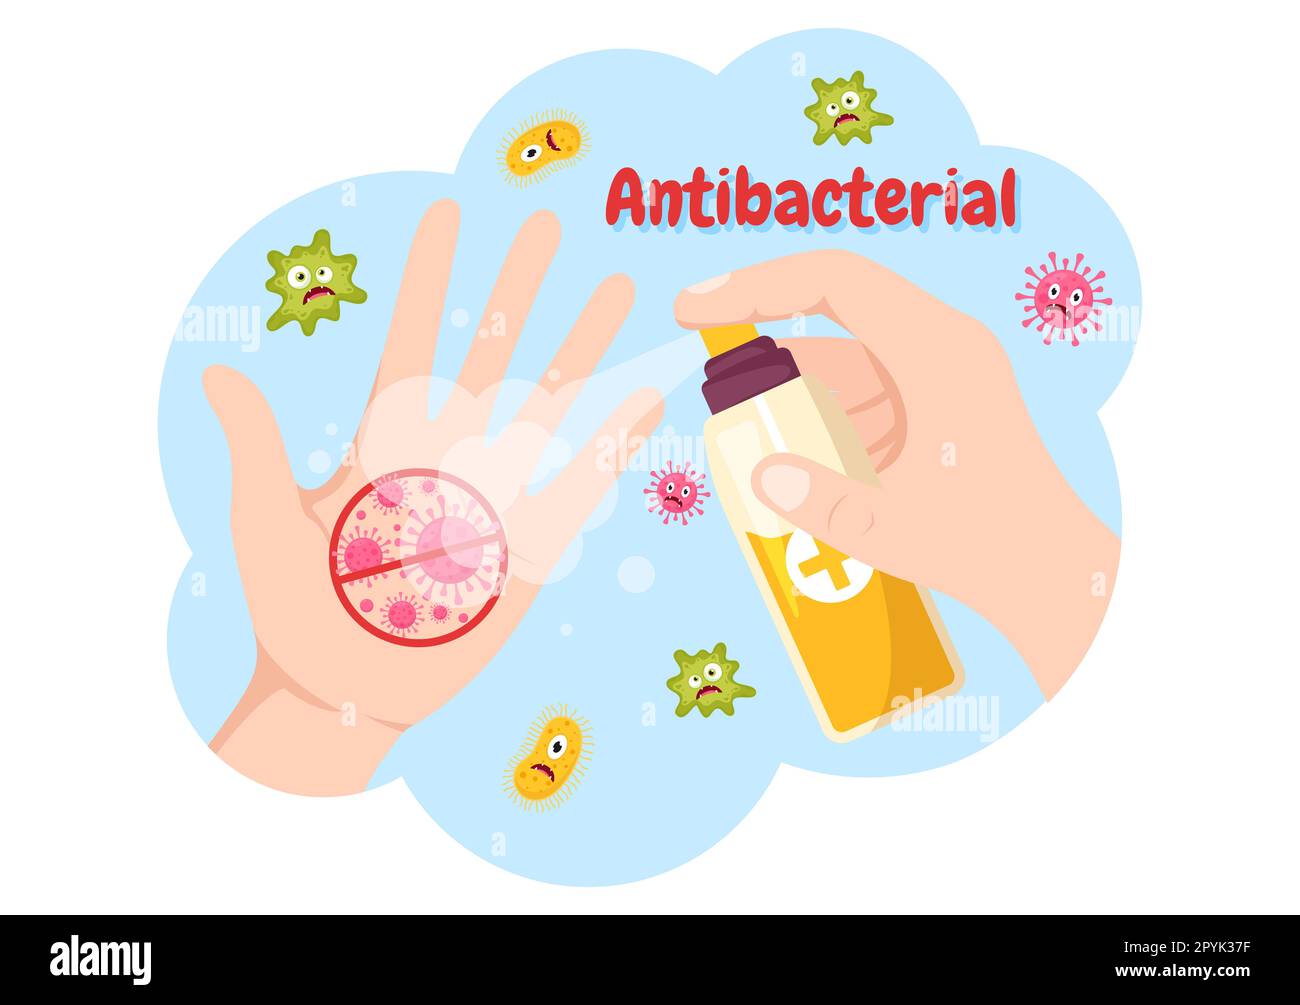 Antibacterial Illustration with Washing Hands, Virus Infection and Microbes Bacterias Control in Hygiene Healthcare Flat Cartoon Hand Drawn Templates Stock Photo